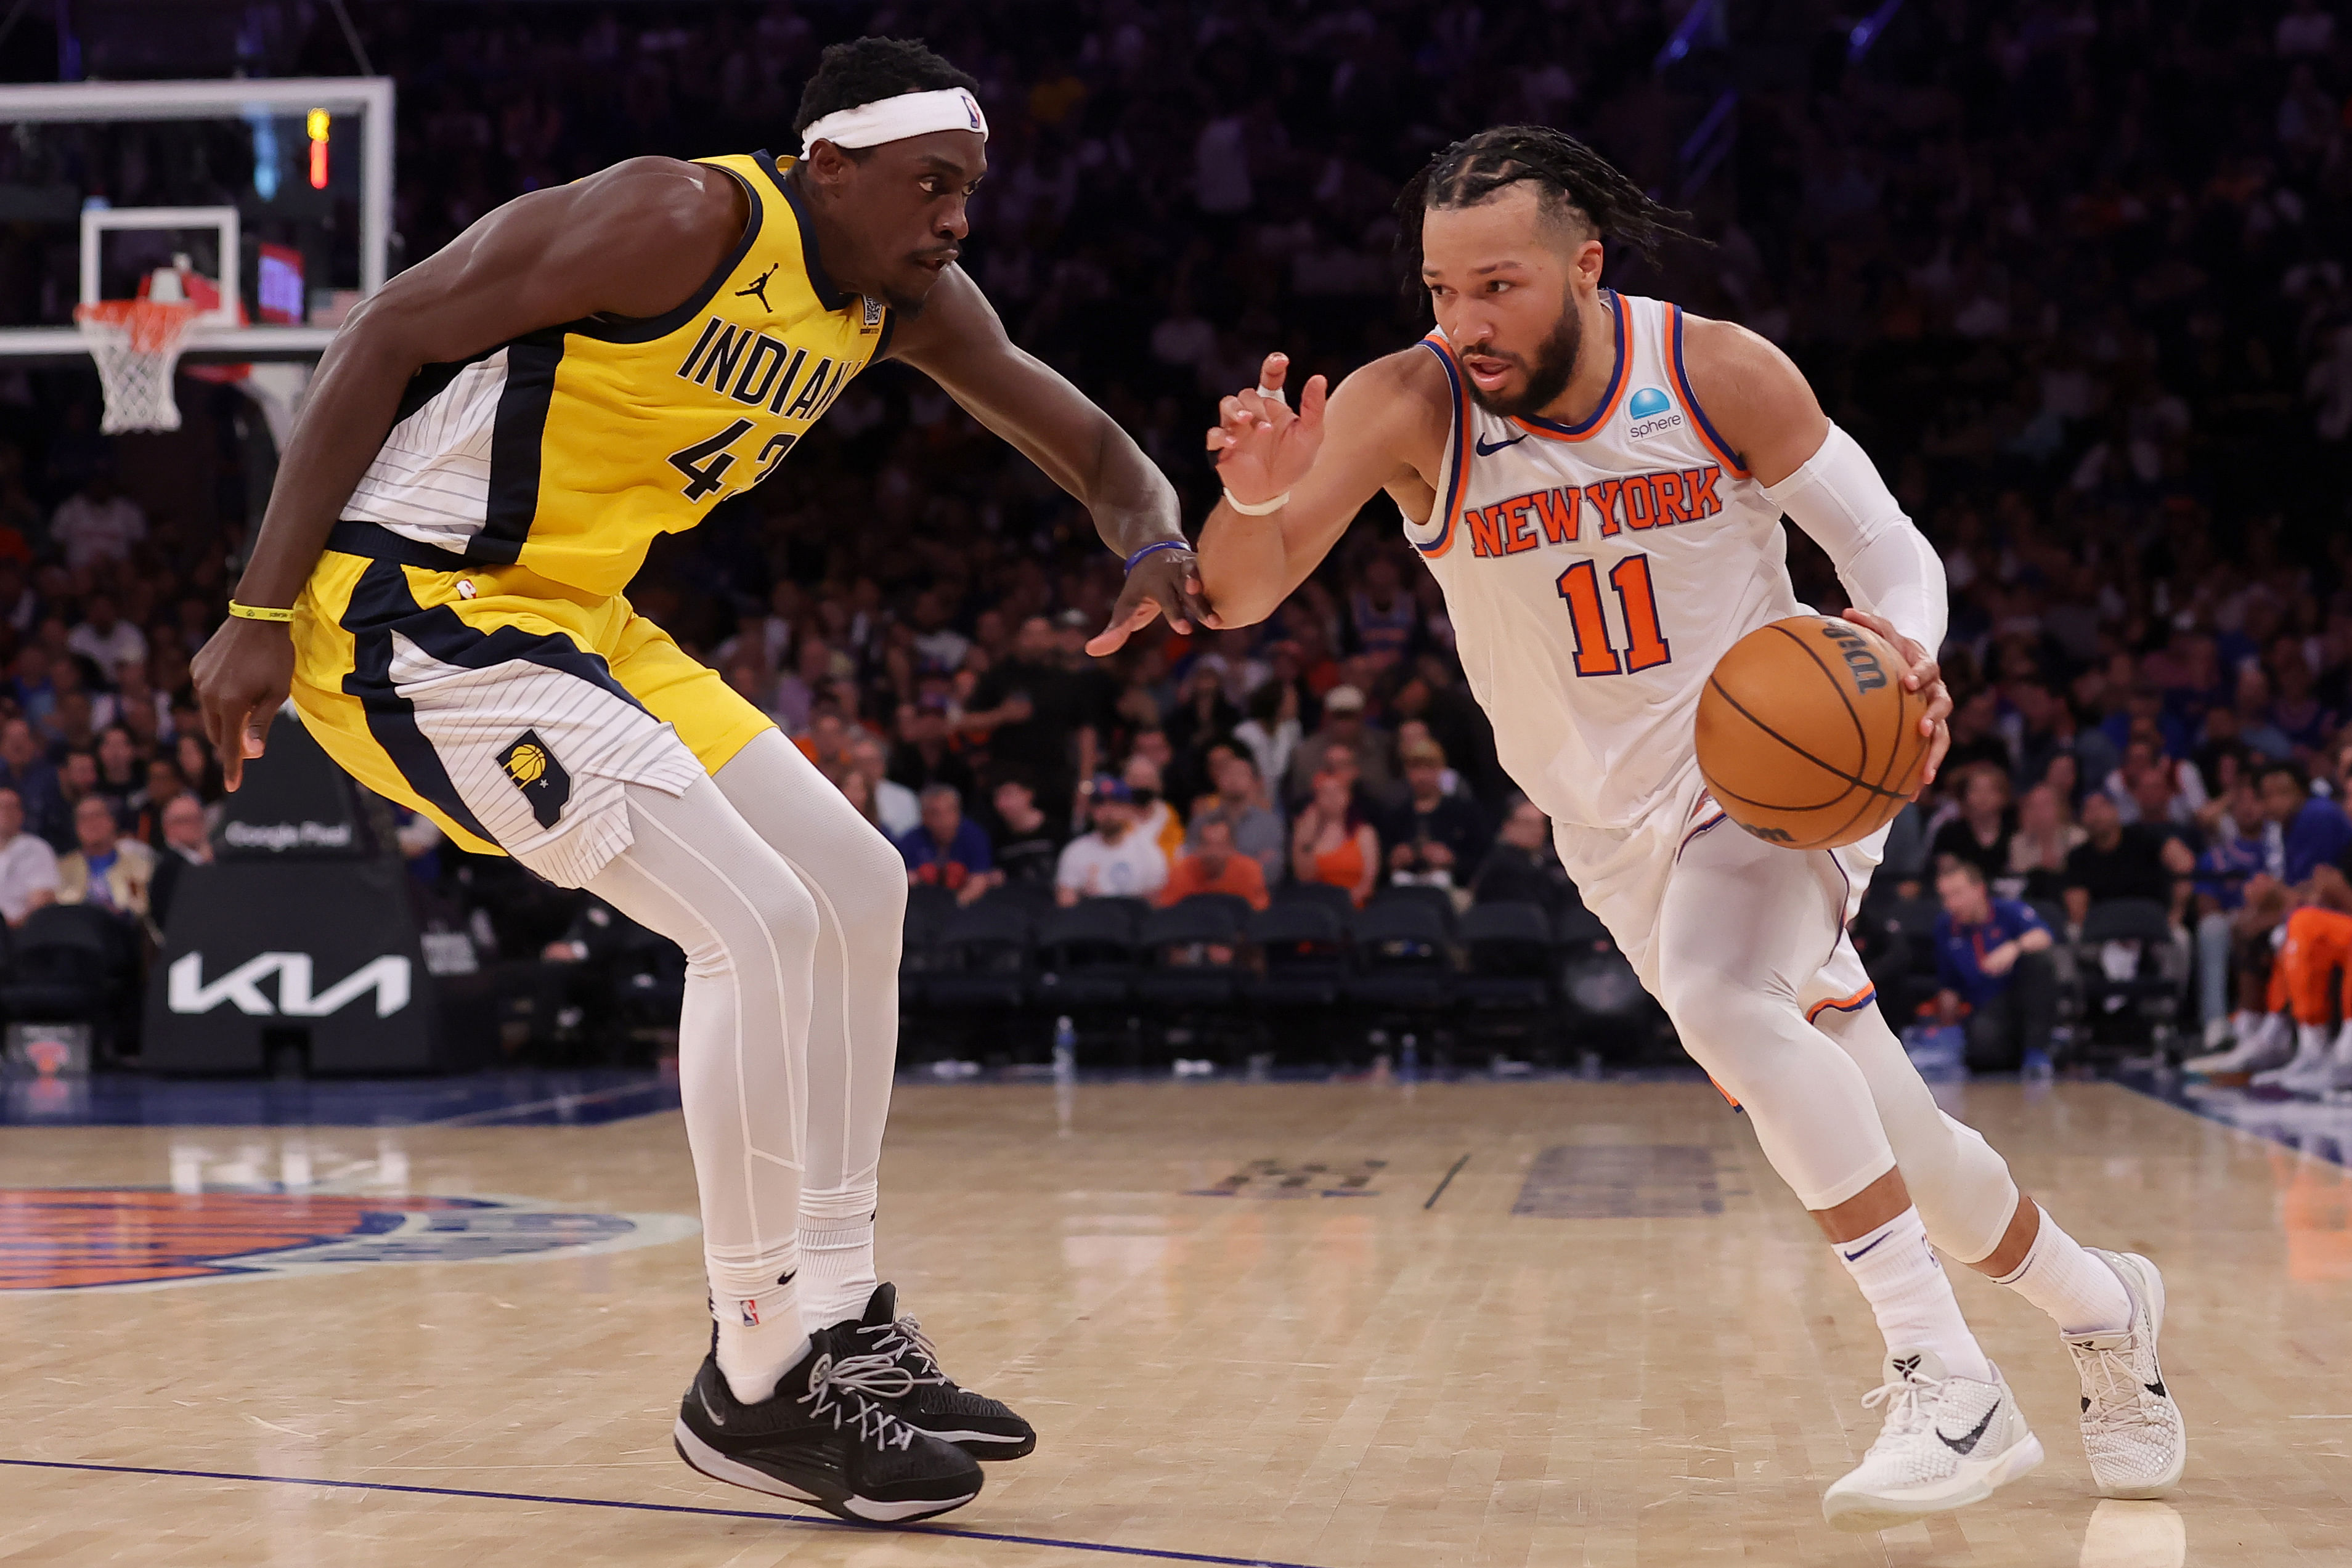 The New York Knicks lost to the Indiana Pacers in Game 7.